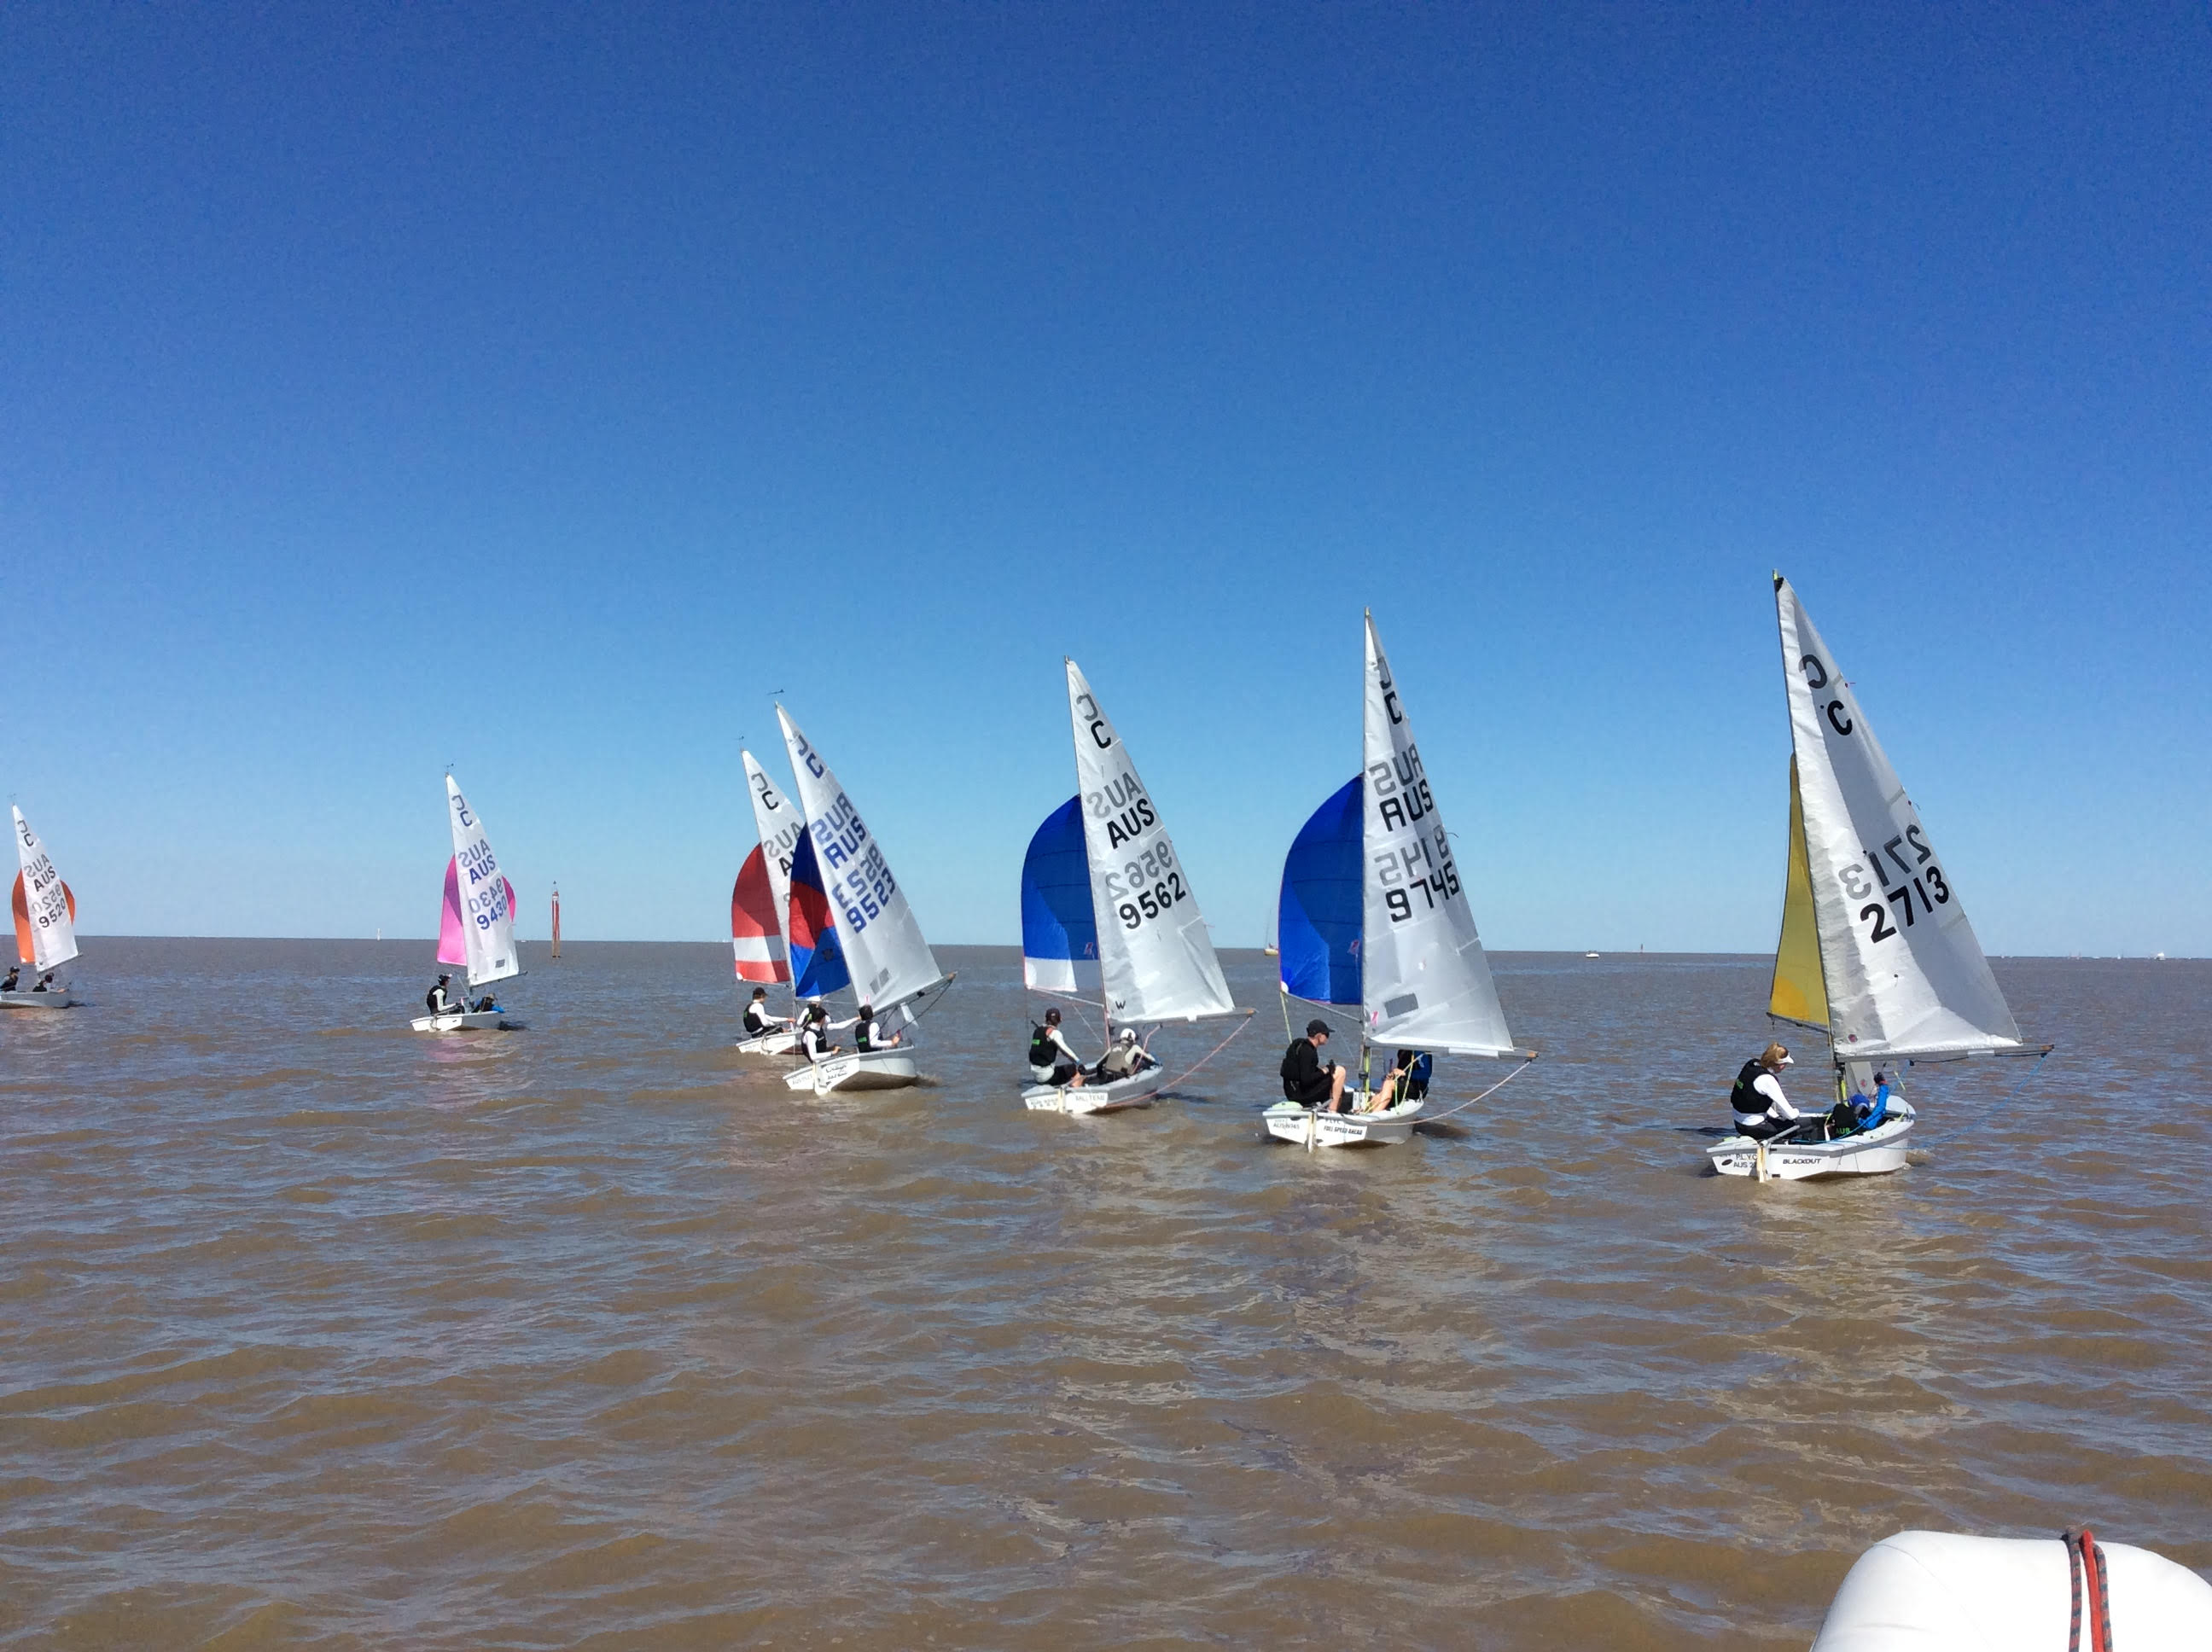 The Australian team of nine boats has been training in light airs at Club Nautico Albatros in Argentina.